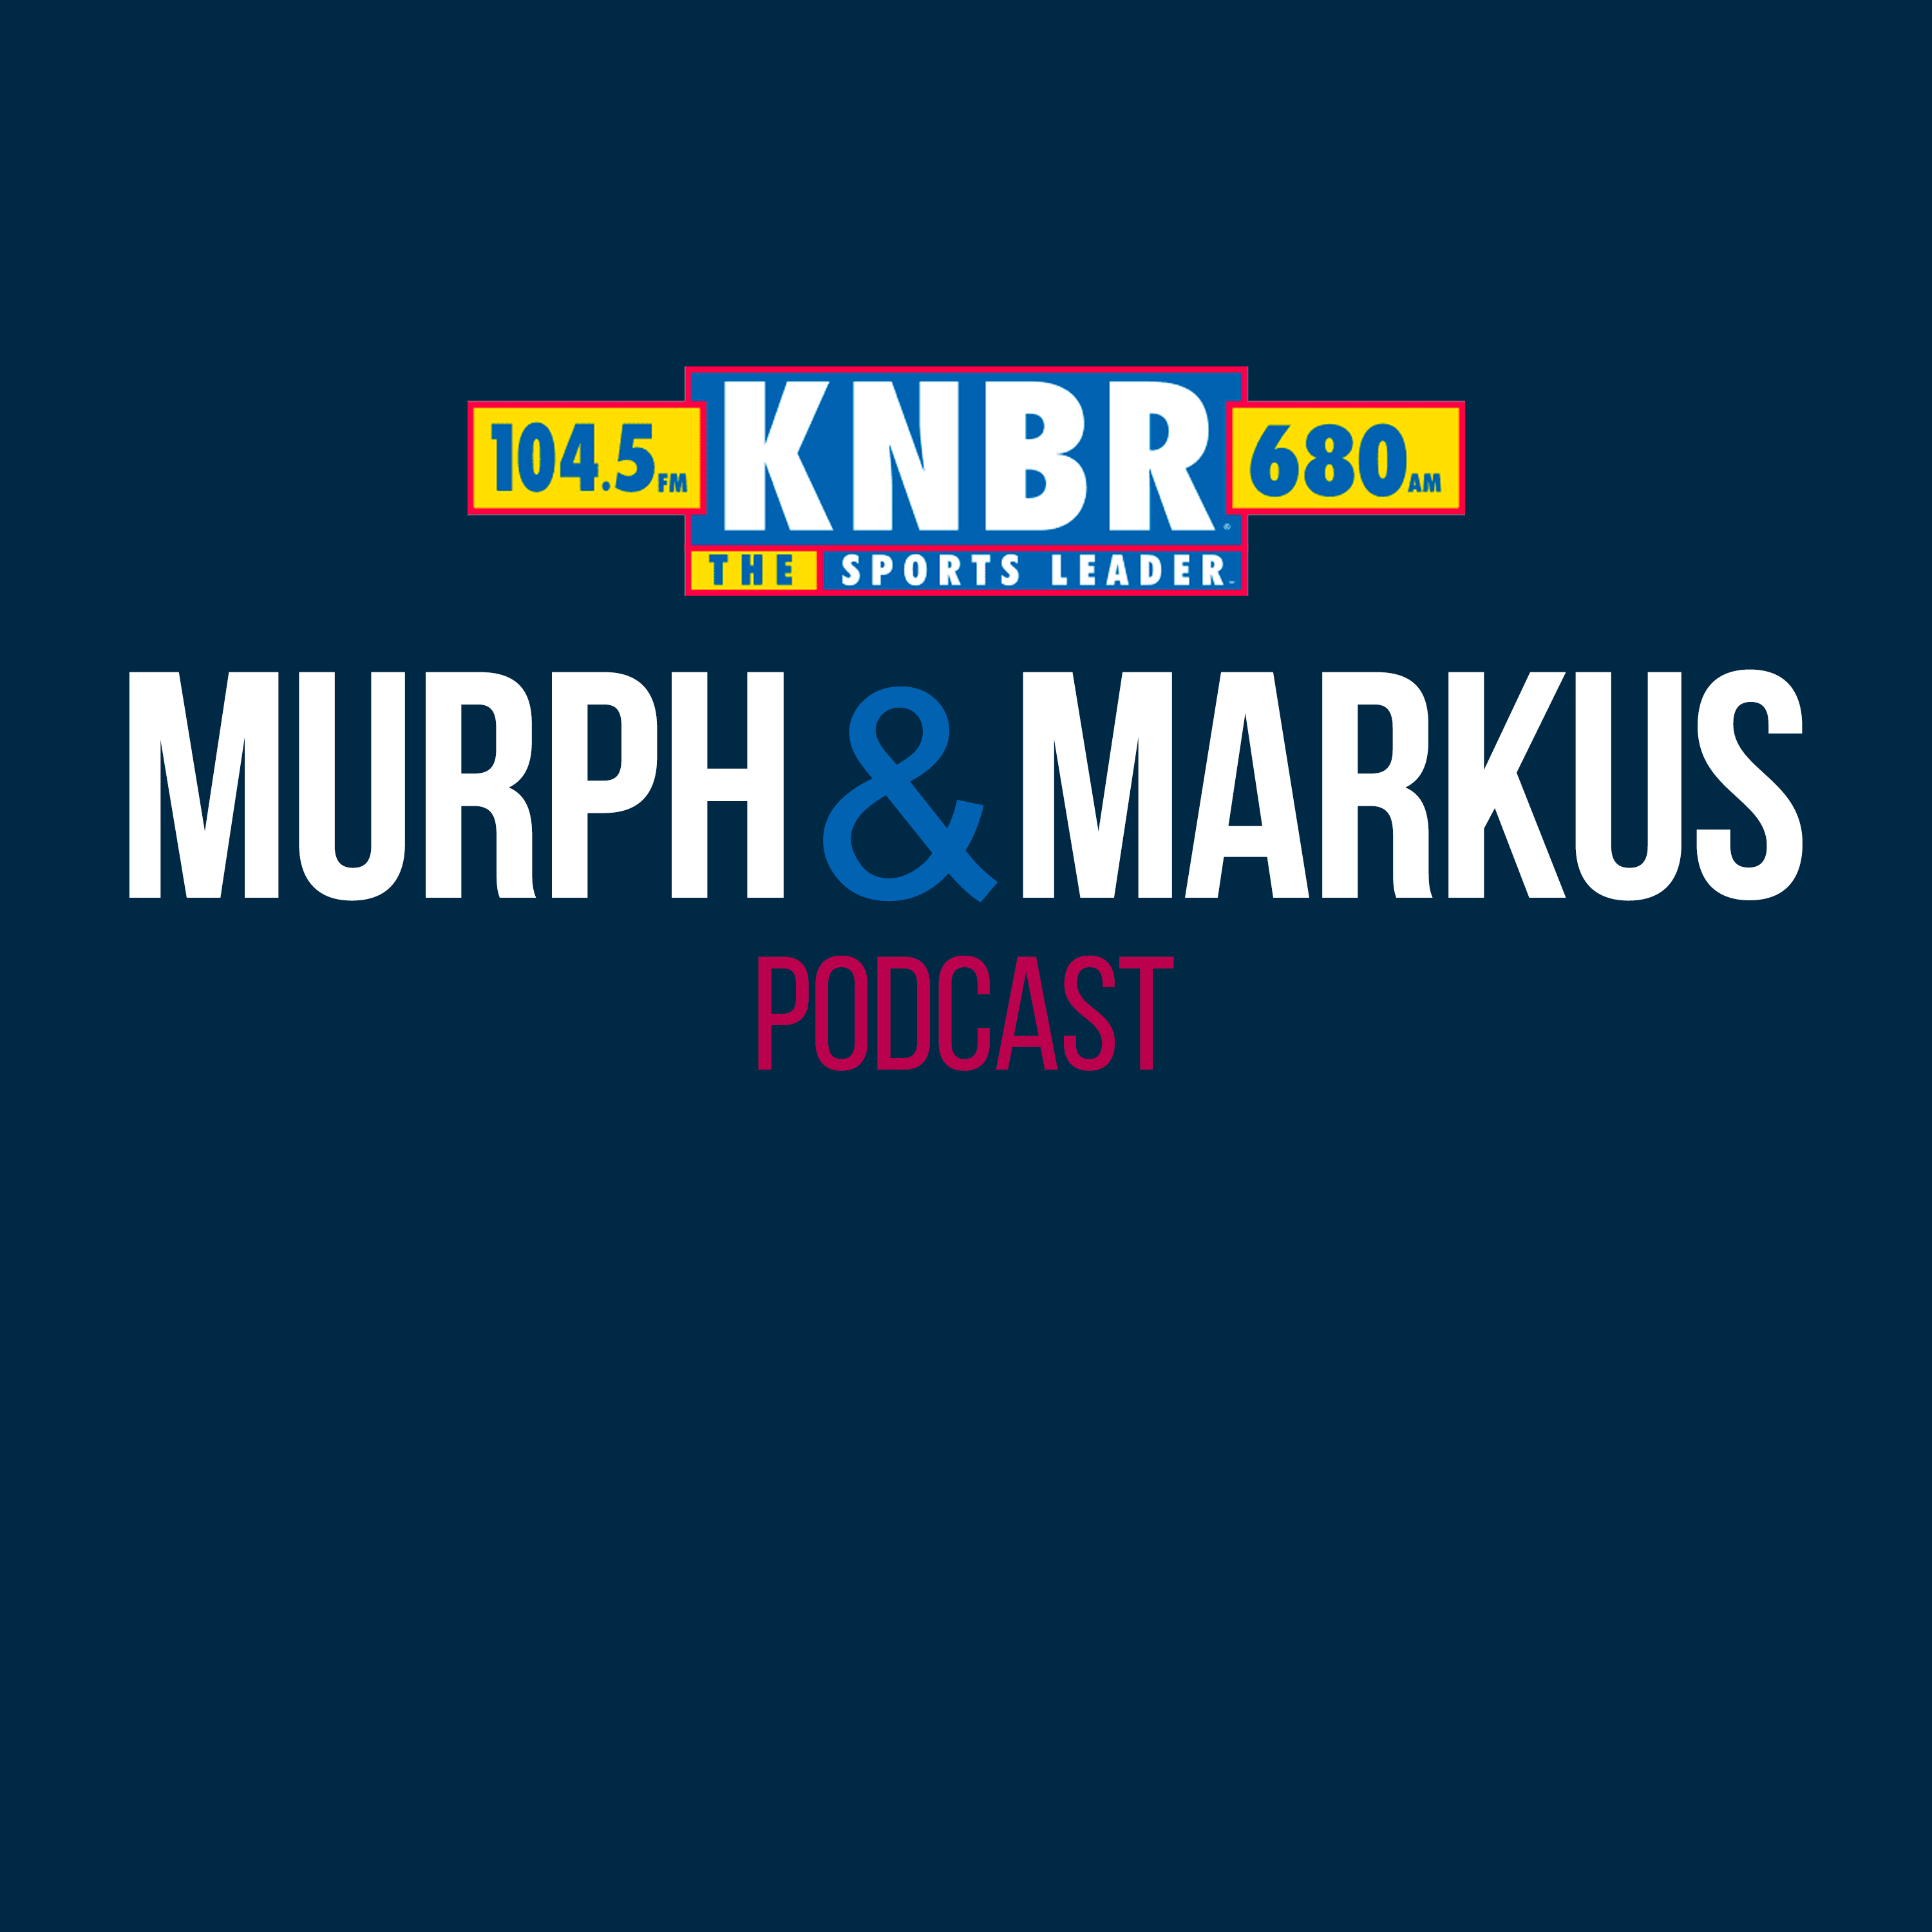 Former GM, Mike Lombardi joined Murph and Markus to share his thoughts on the Brandon Aiyuk situation and what could be happening behind the scenes